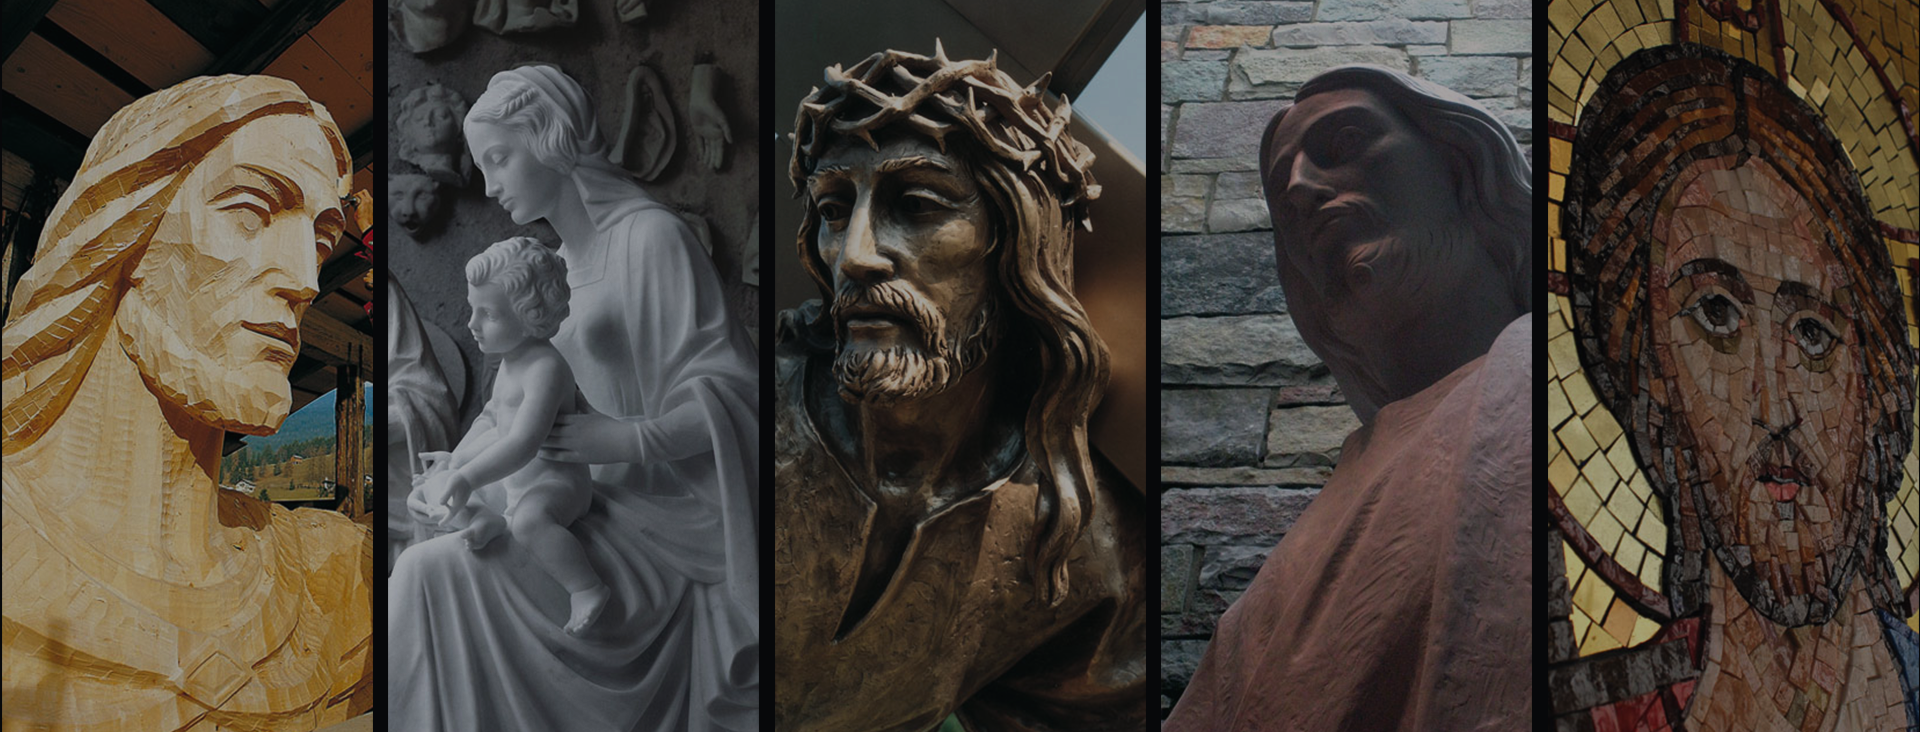 discover our wide selection of custom statues